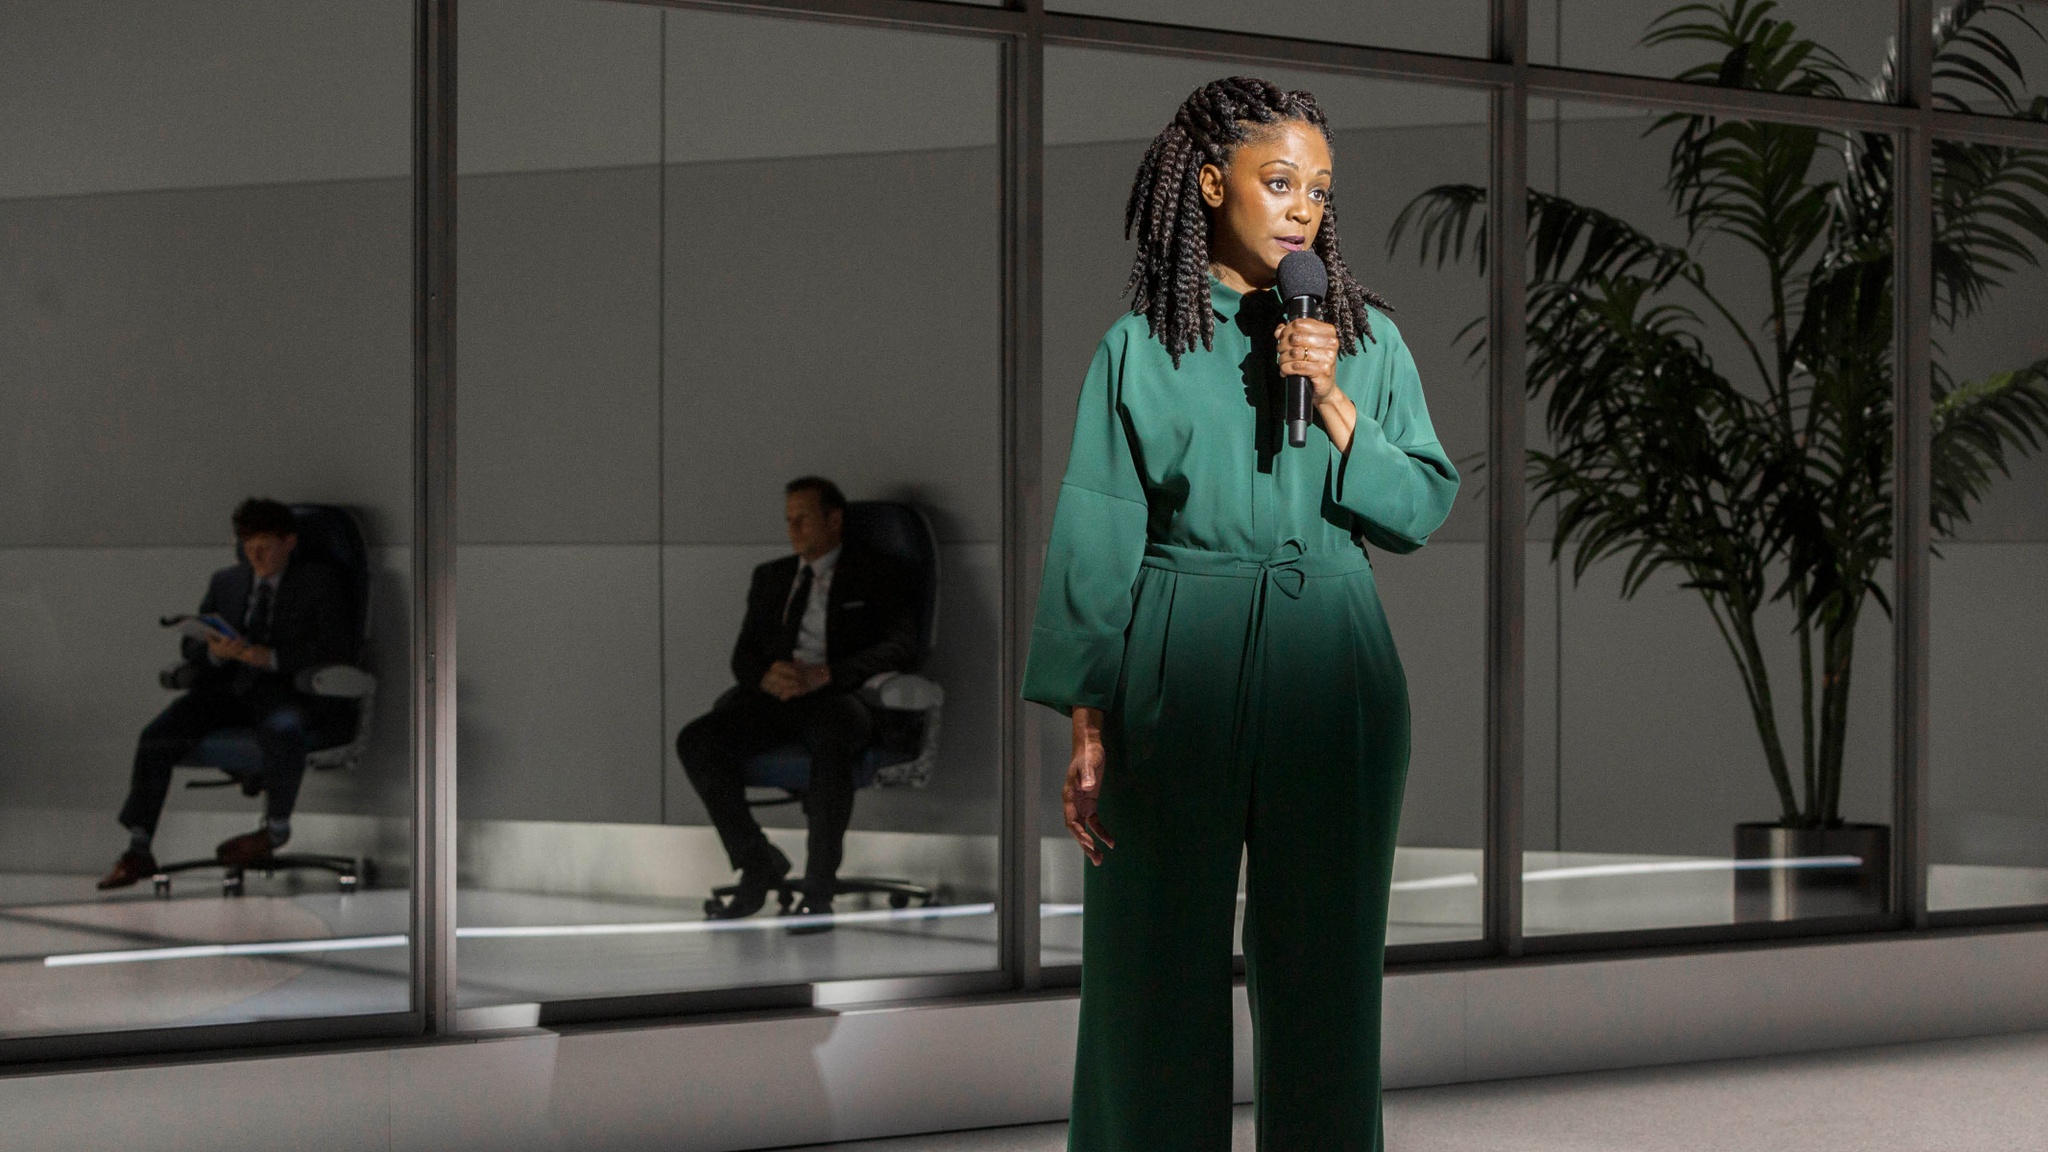 A Black woman in a green jumpsuit stands in front of a stage set resembling an airport waiting room